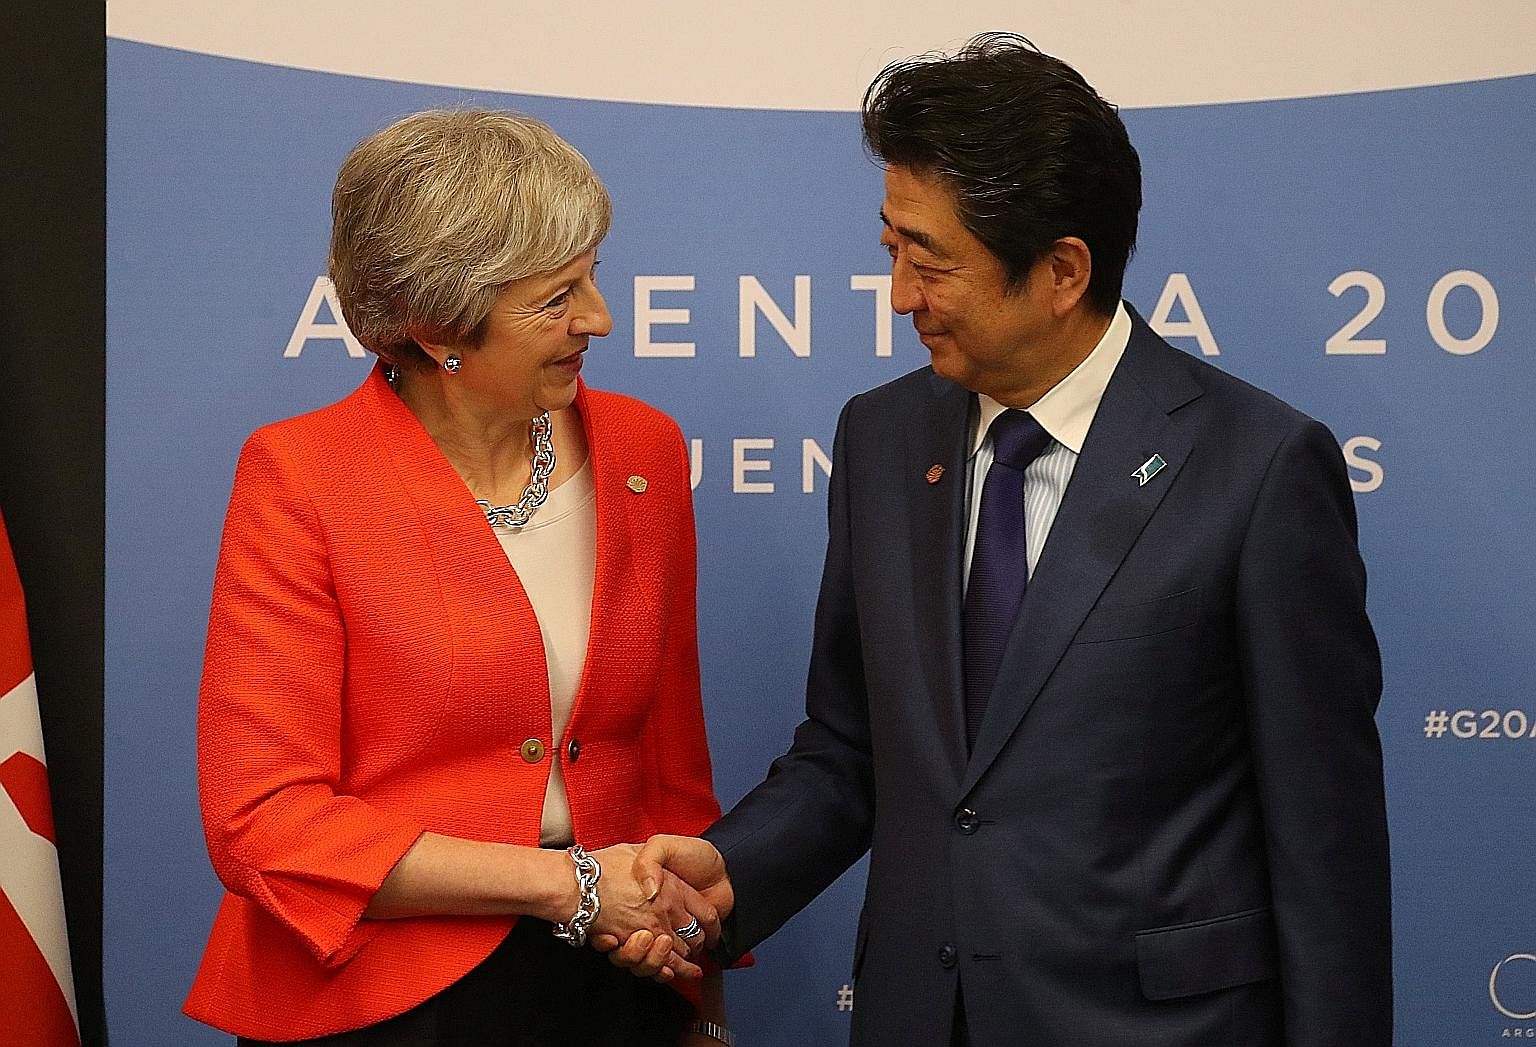 British Prime Minister Theresa May and Japanese Prime Minister Shinzo Abe at a bilateral meeting at the Group of 20 summit in Buenos Aires, Argentina, earlier this month. At the meeting, Mr Abe urged Mrs May to avoid a no-deal Brexit and ensure "tran